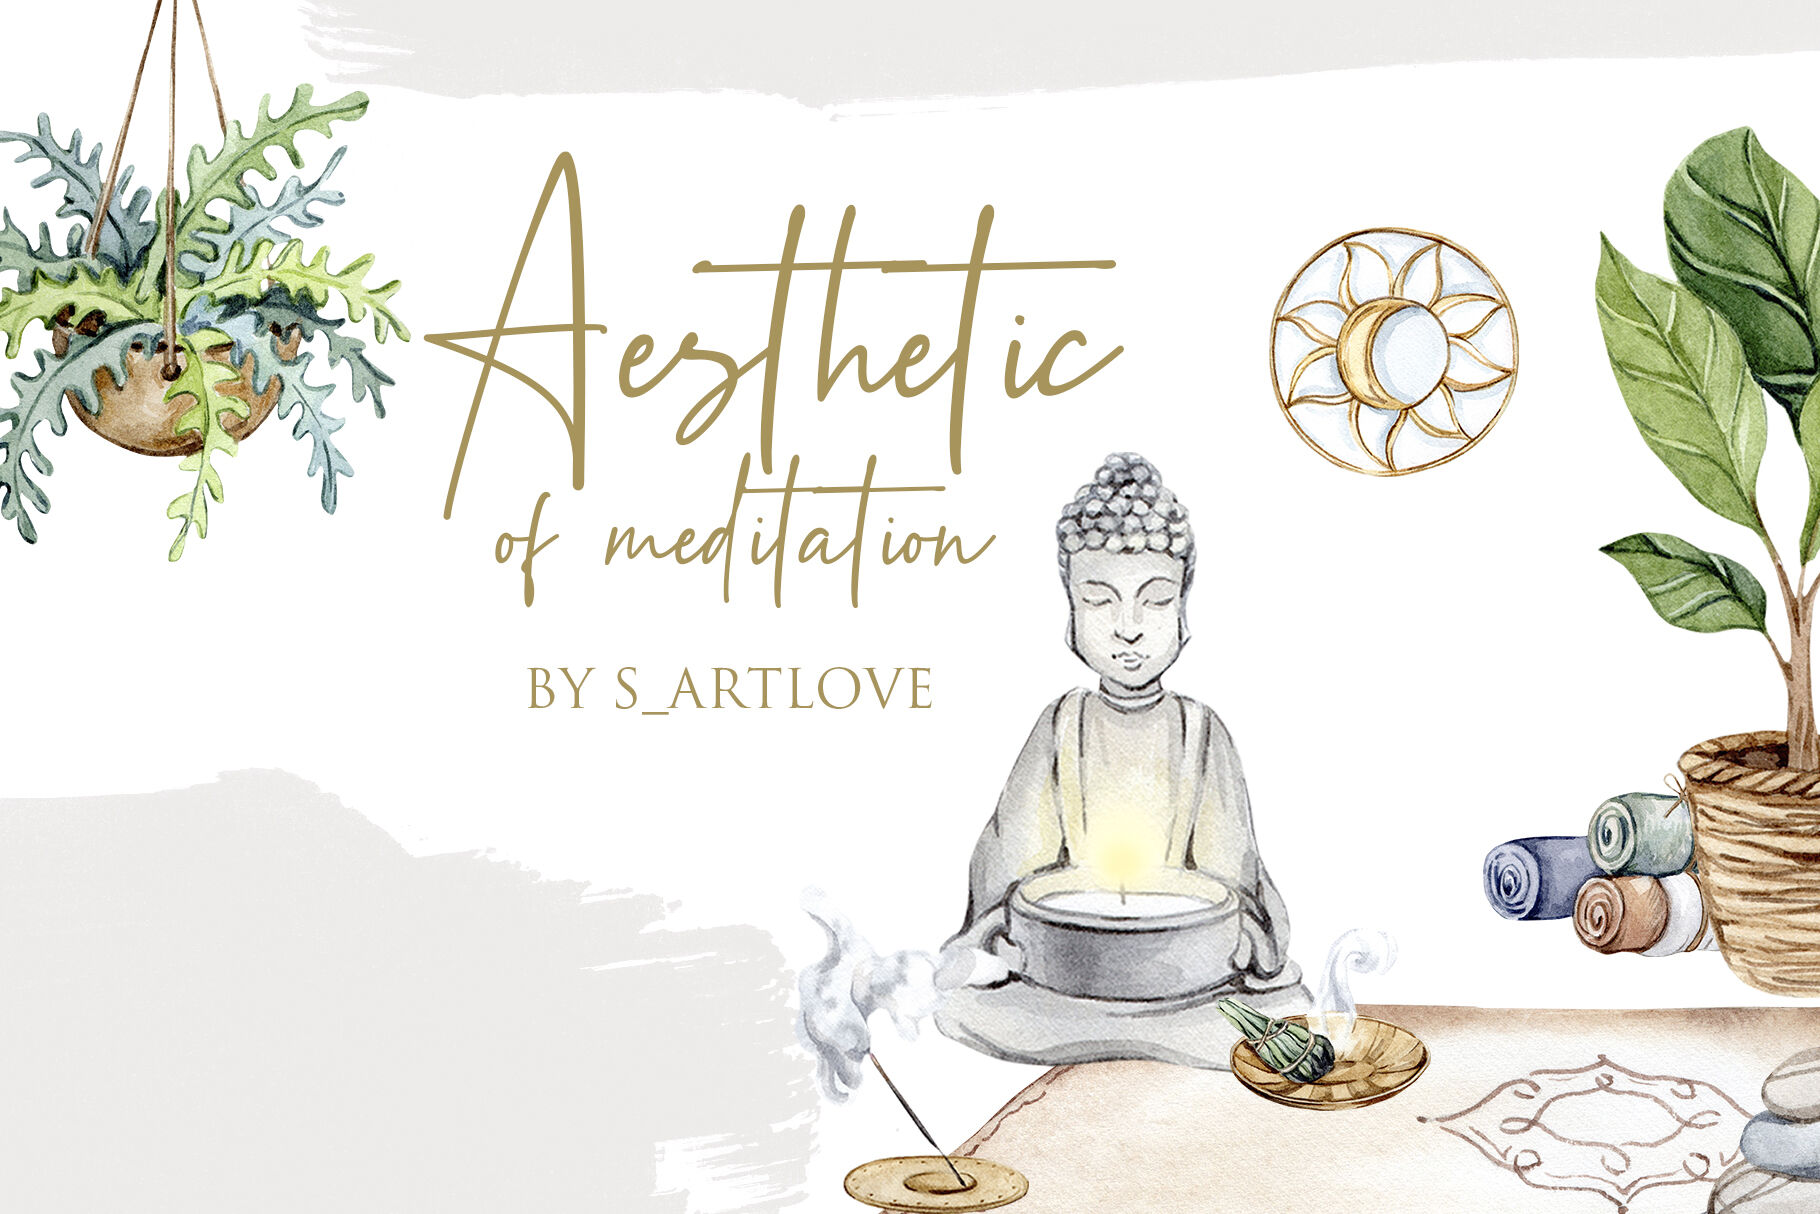 Meditation Accessories Clipart By S_ARTLOVE